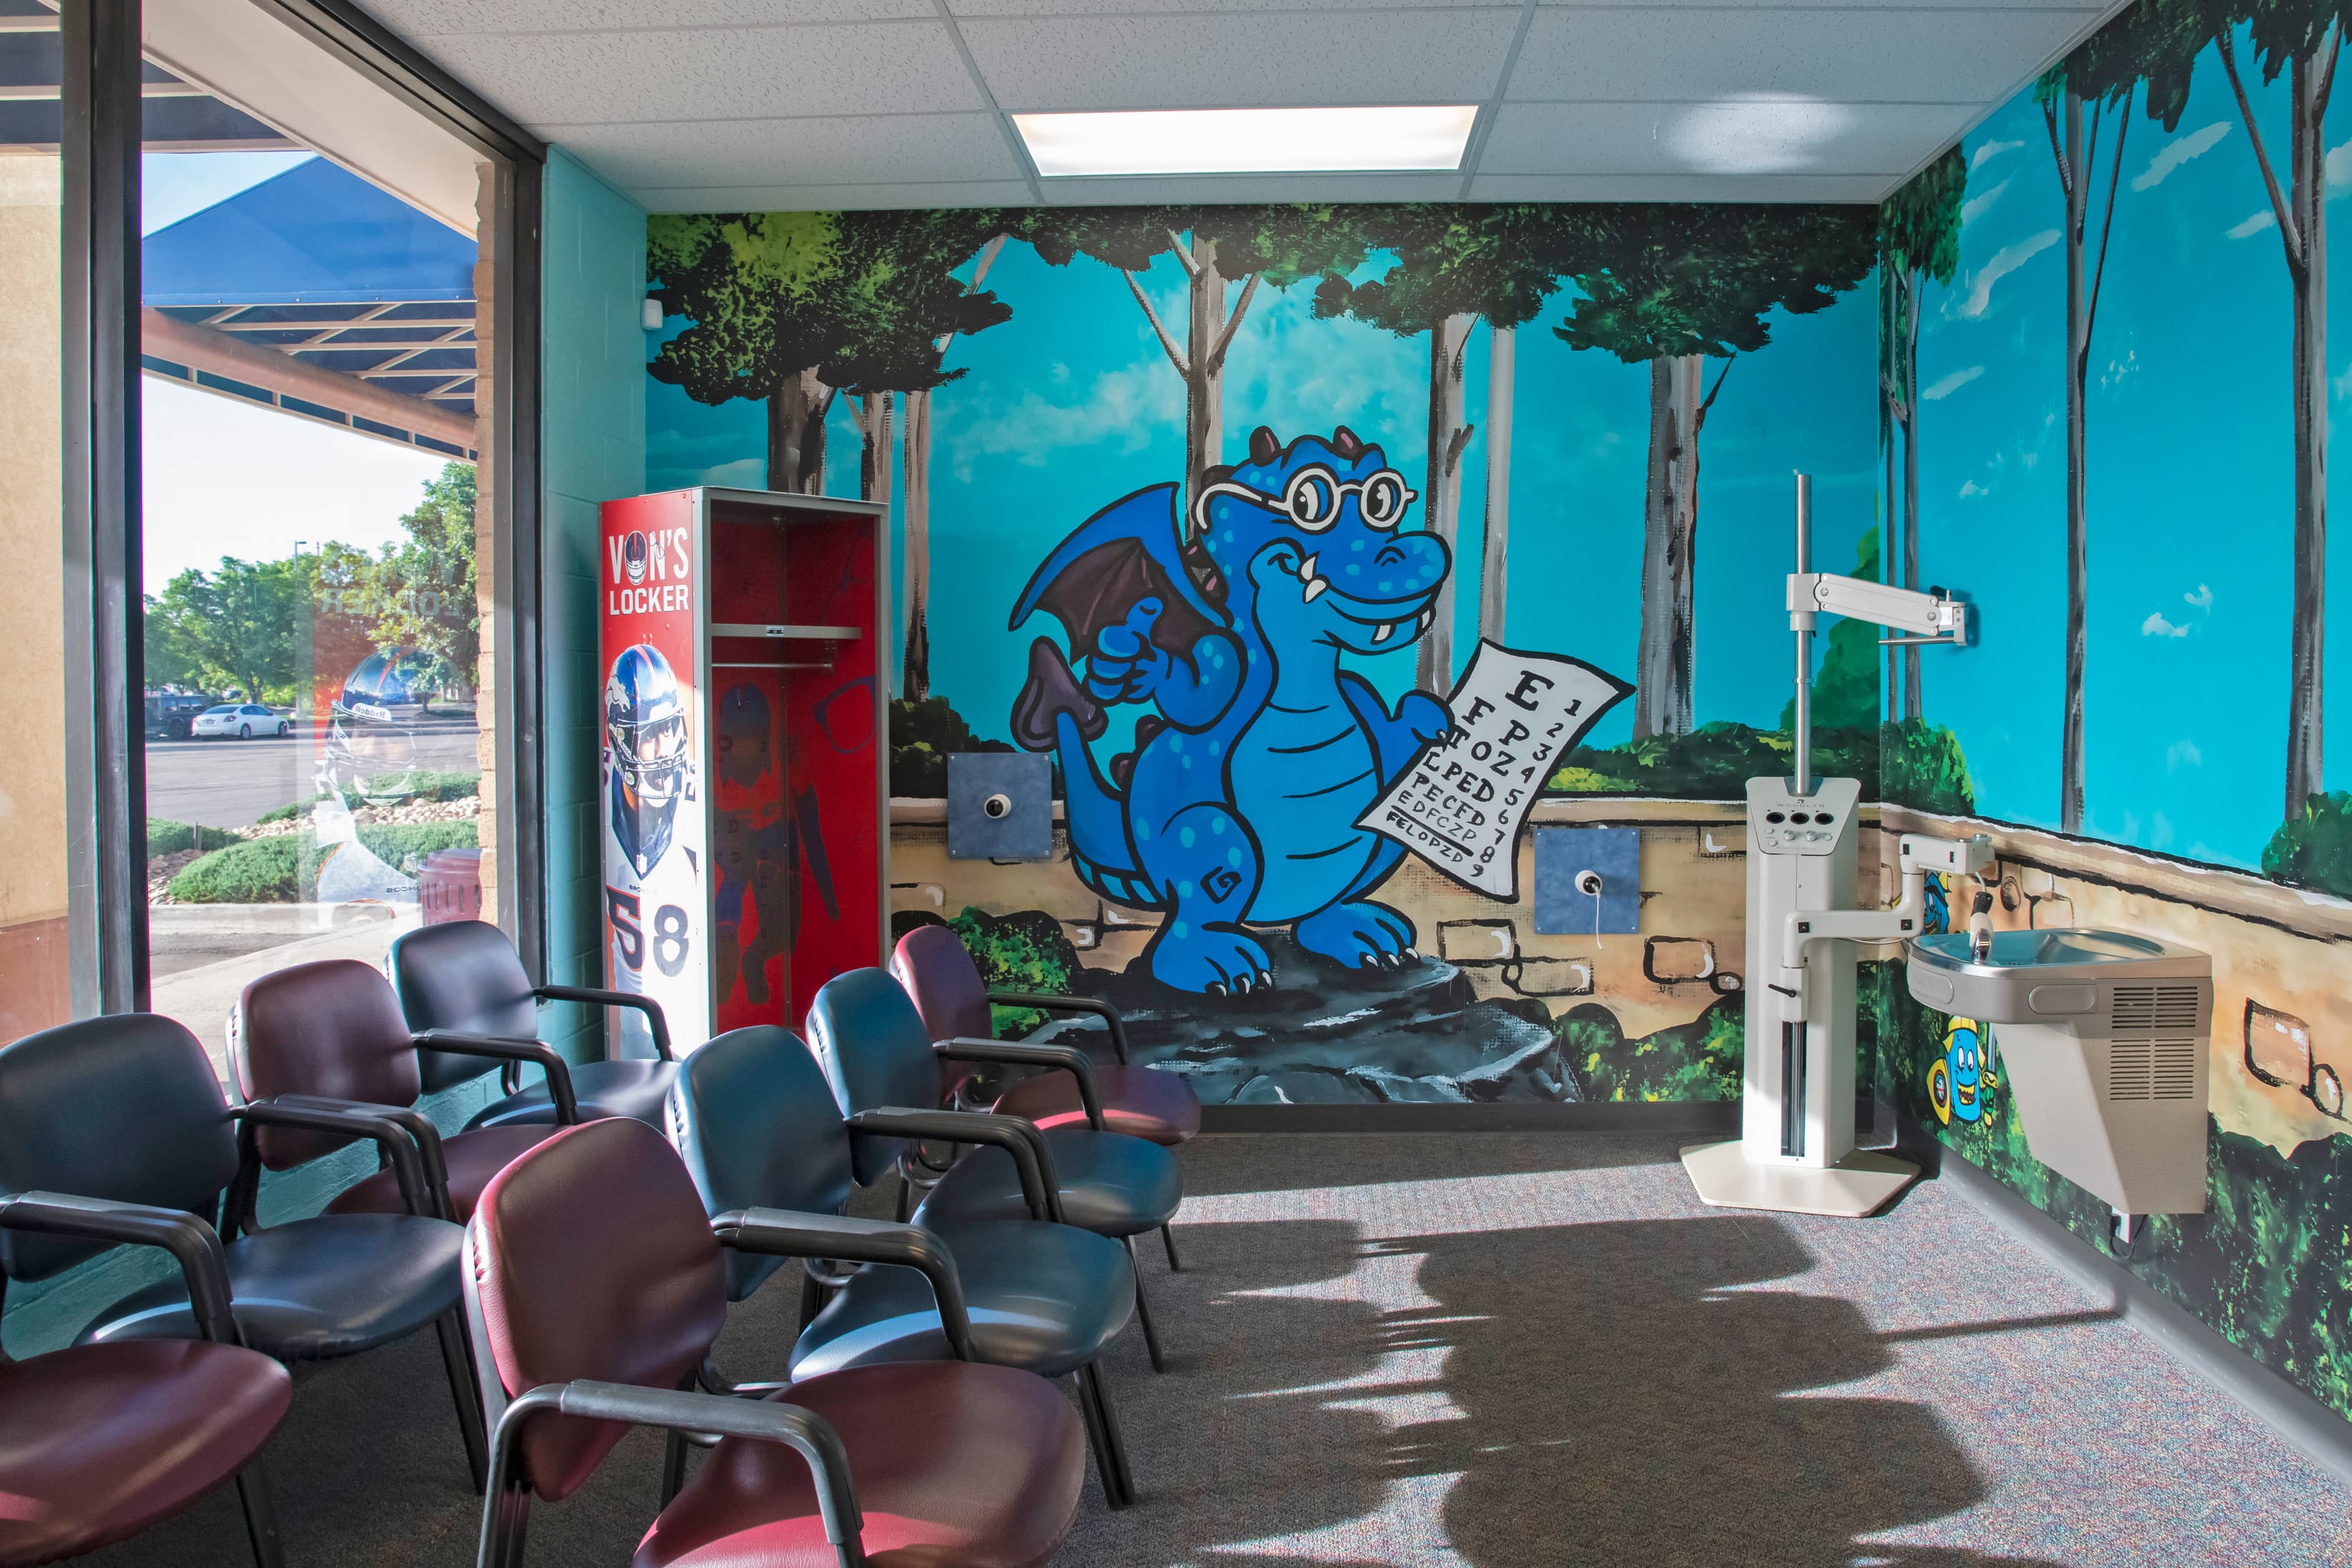 interior of a kid's dental office with a blue cartoon dragon on the wall